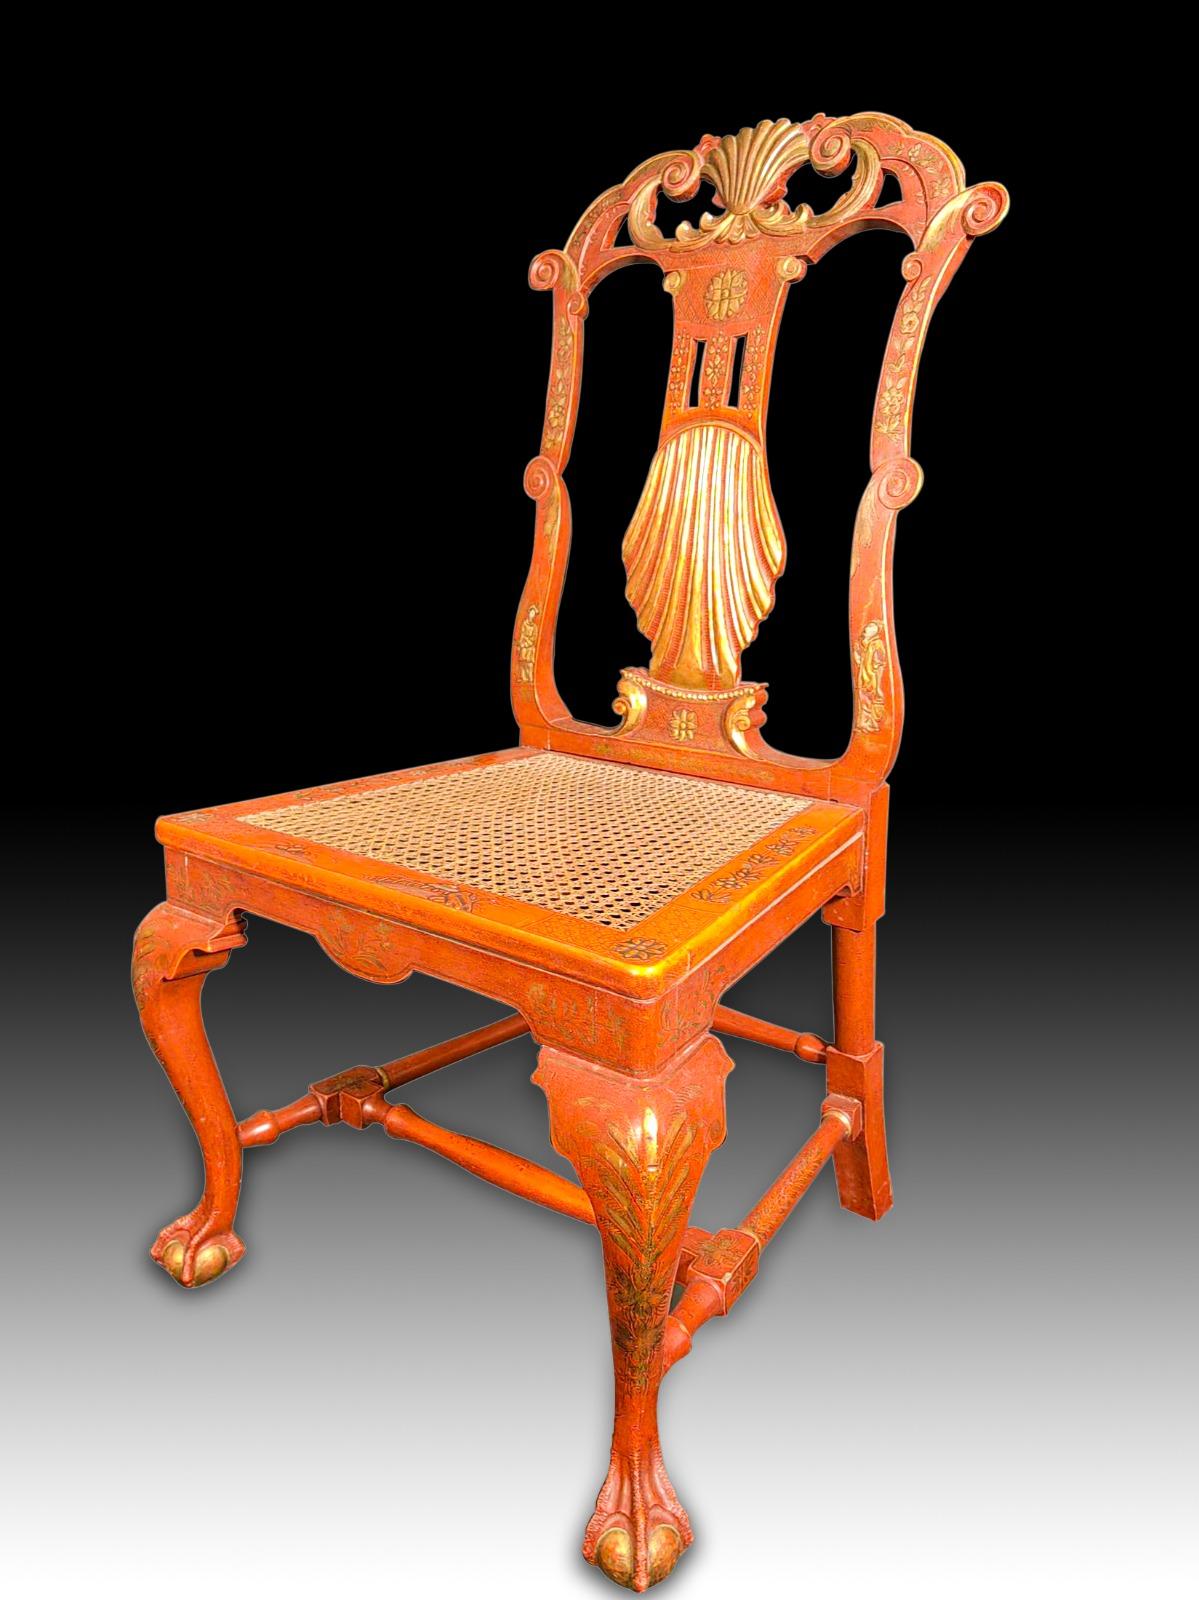 Six George II Style Chairs Red and Gold Japanese Side Chairs 19th Century For Sale 5